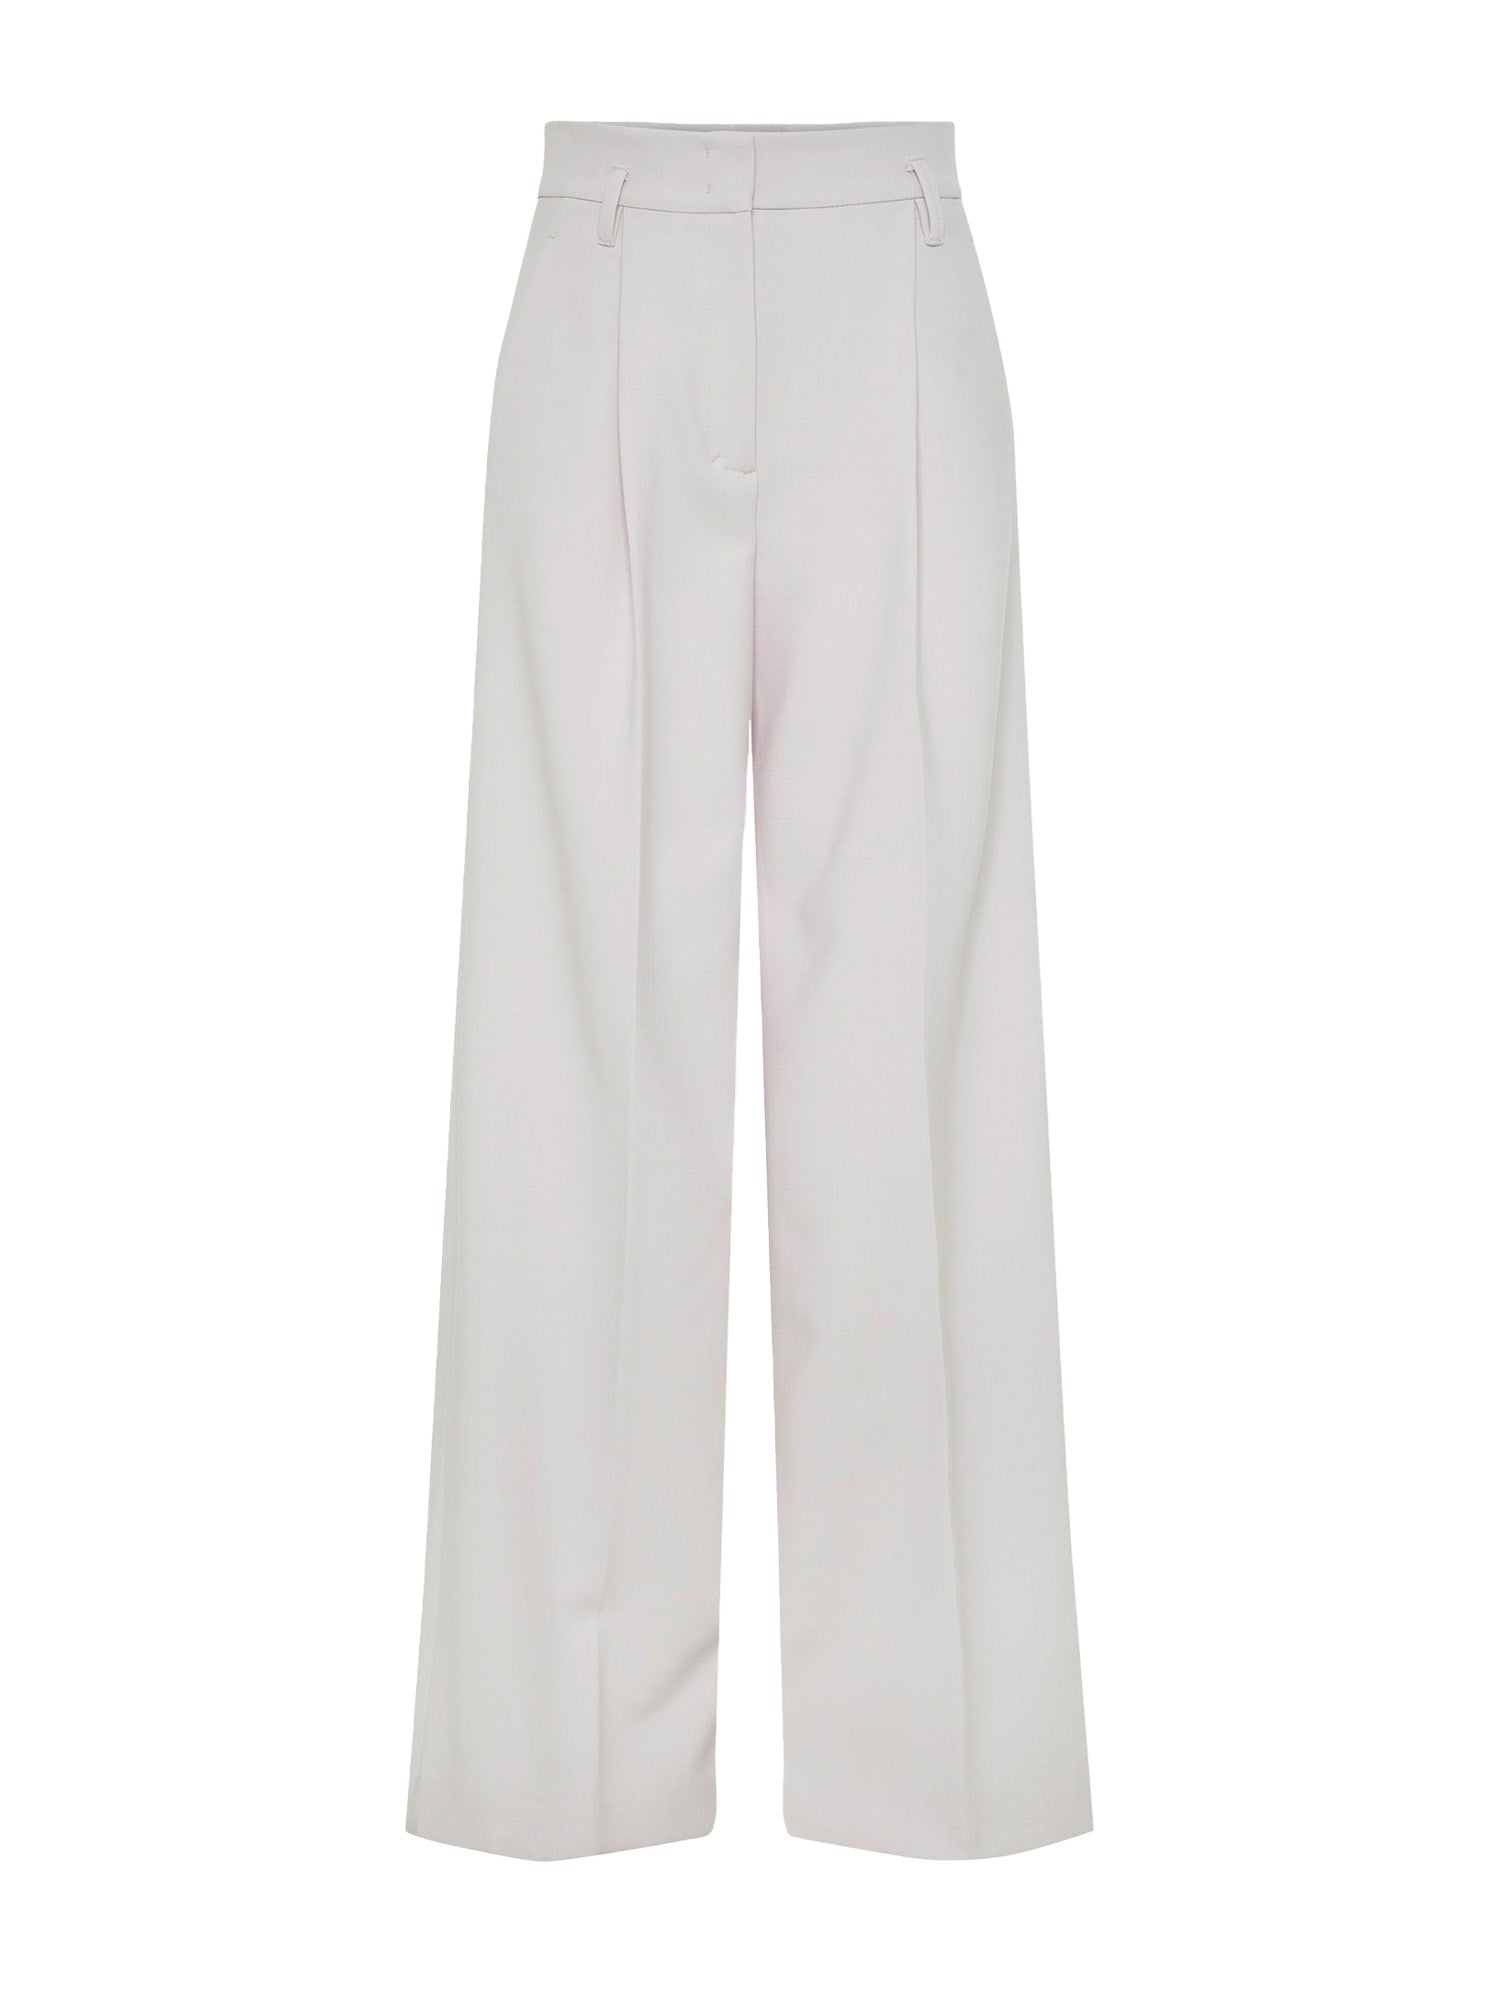 Dorothee Schumacher Refreshing Ambition Wide Pants